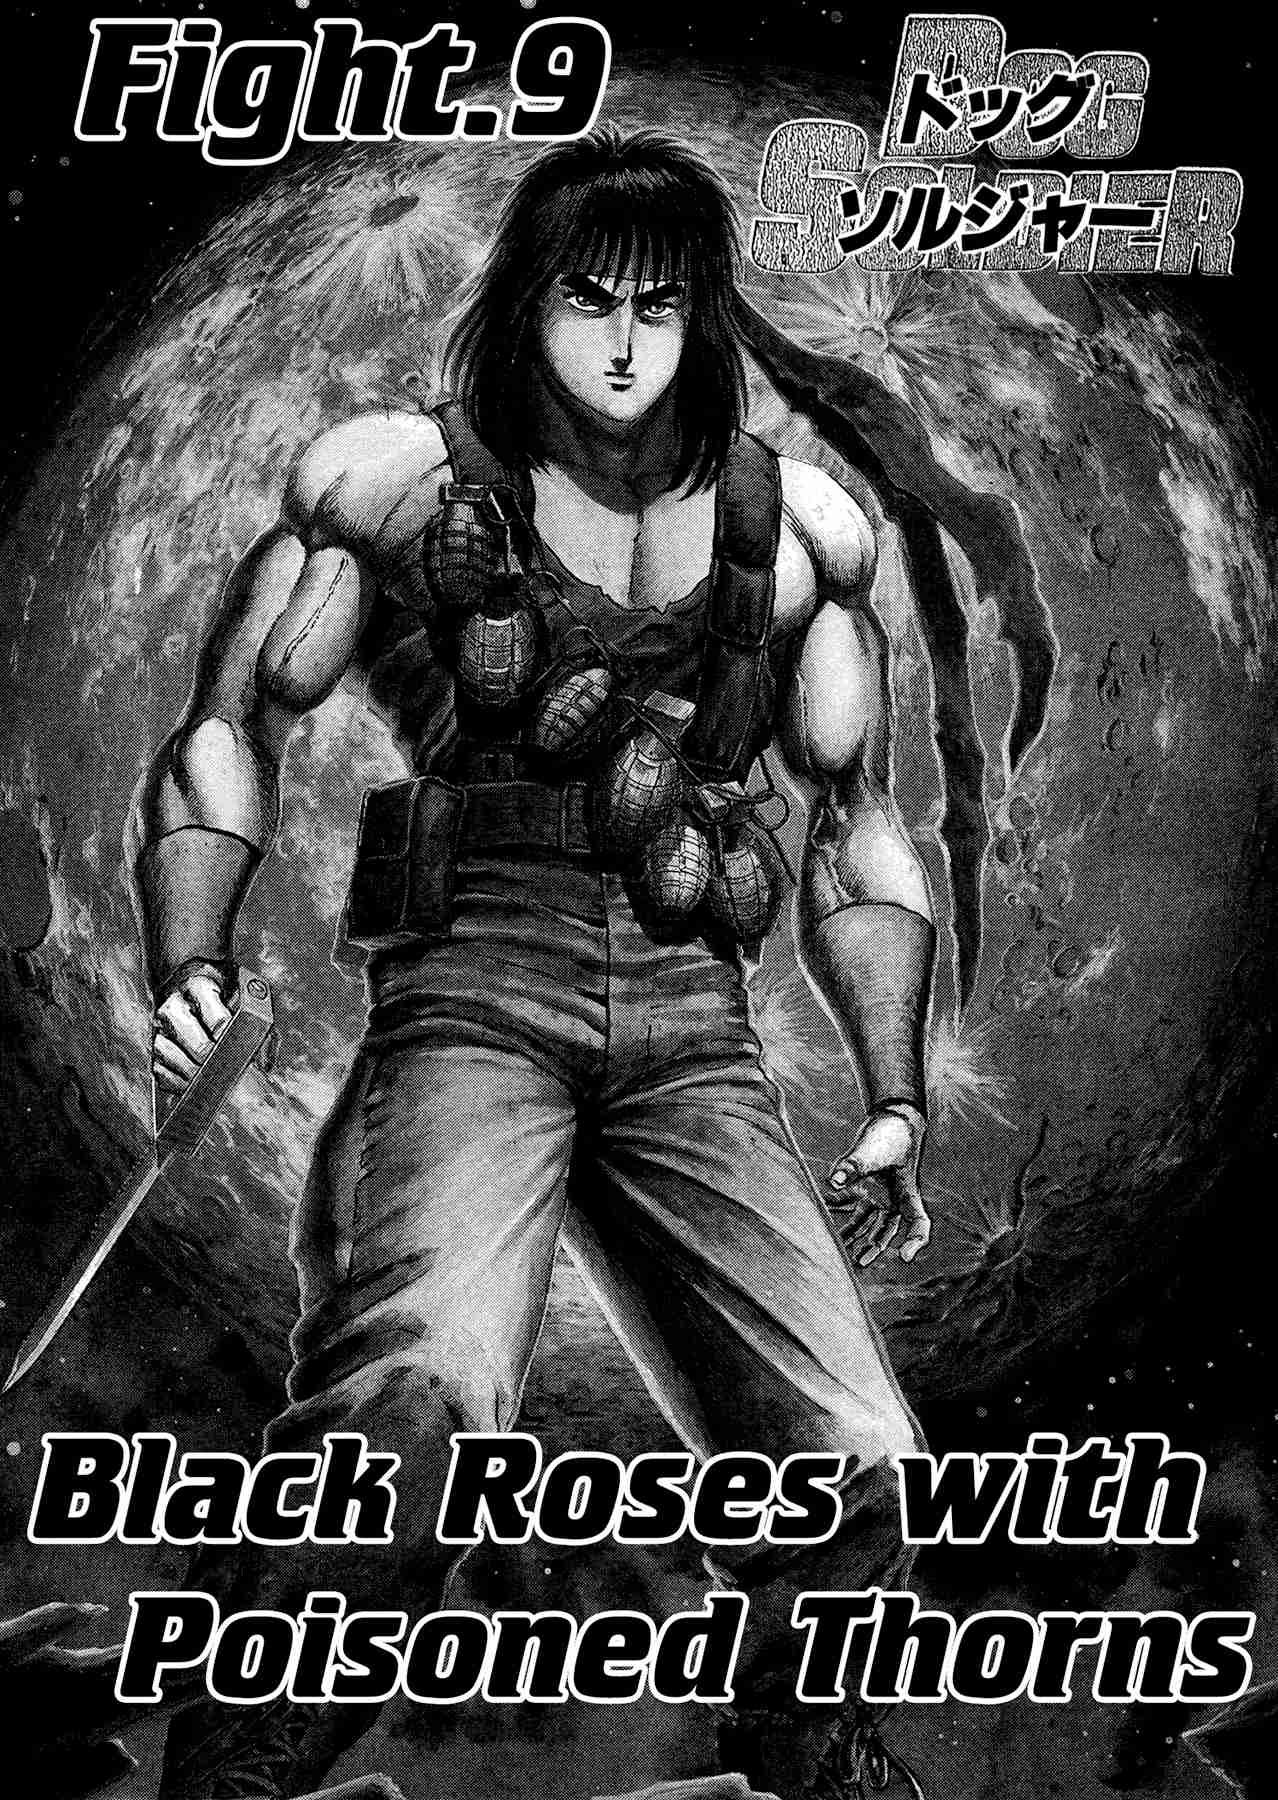 Dog Soldier Vol. 6 Ch. 19 Black Roses with Poisoned Thorns